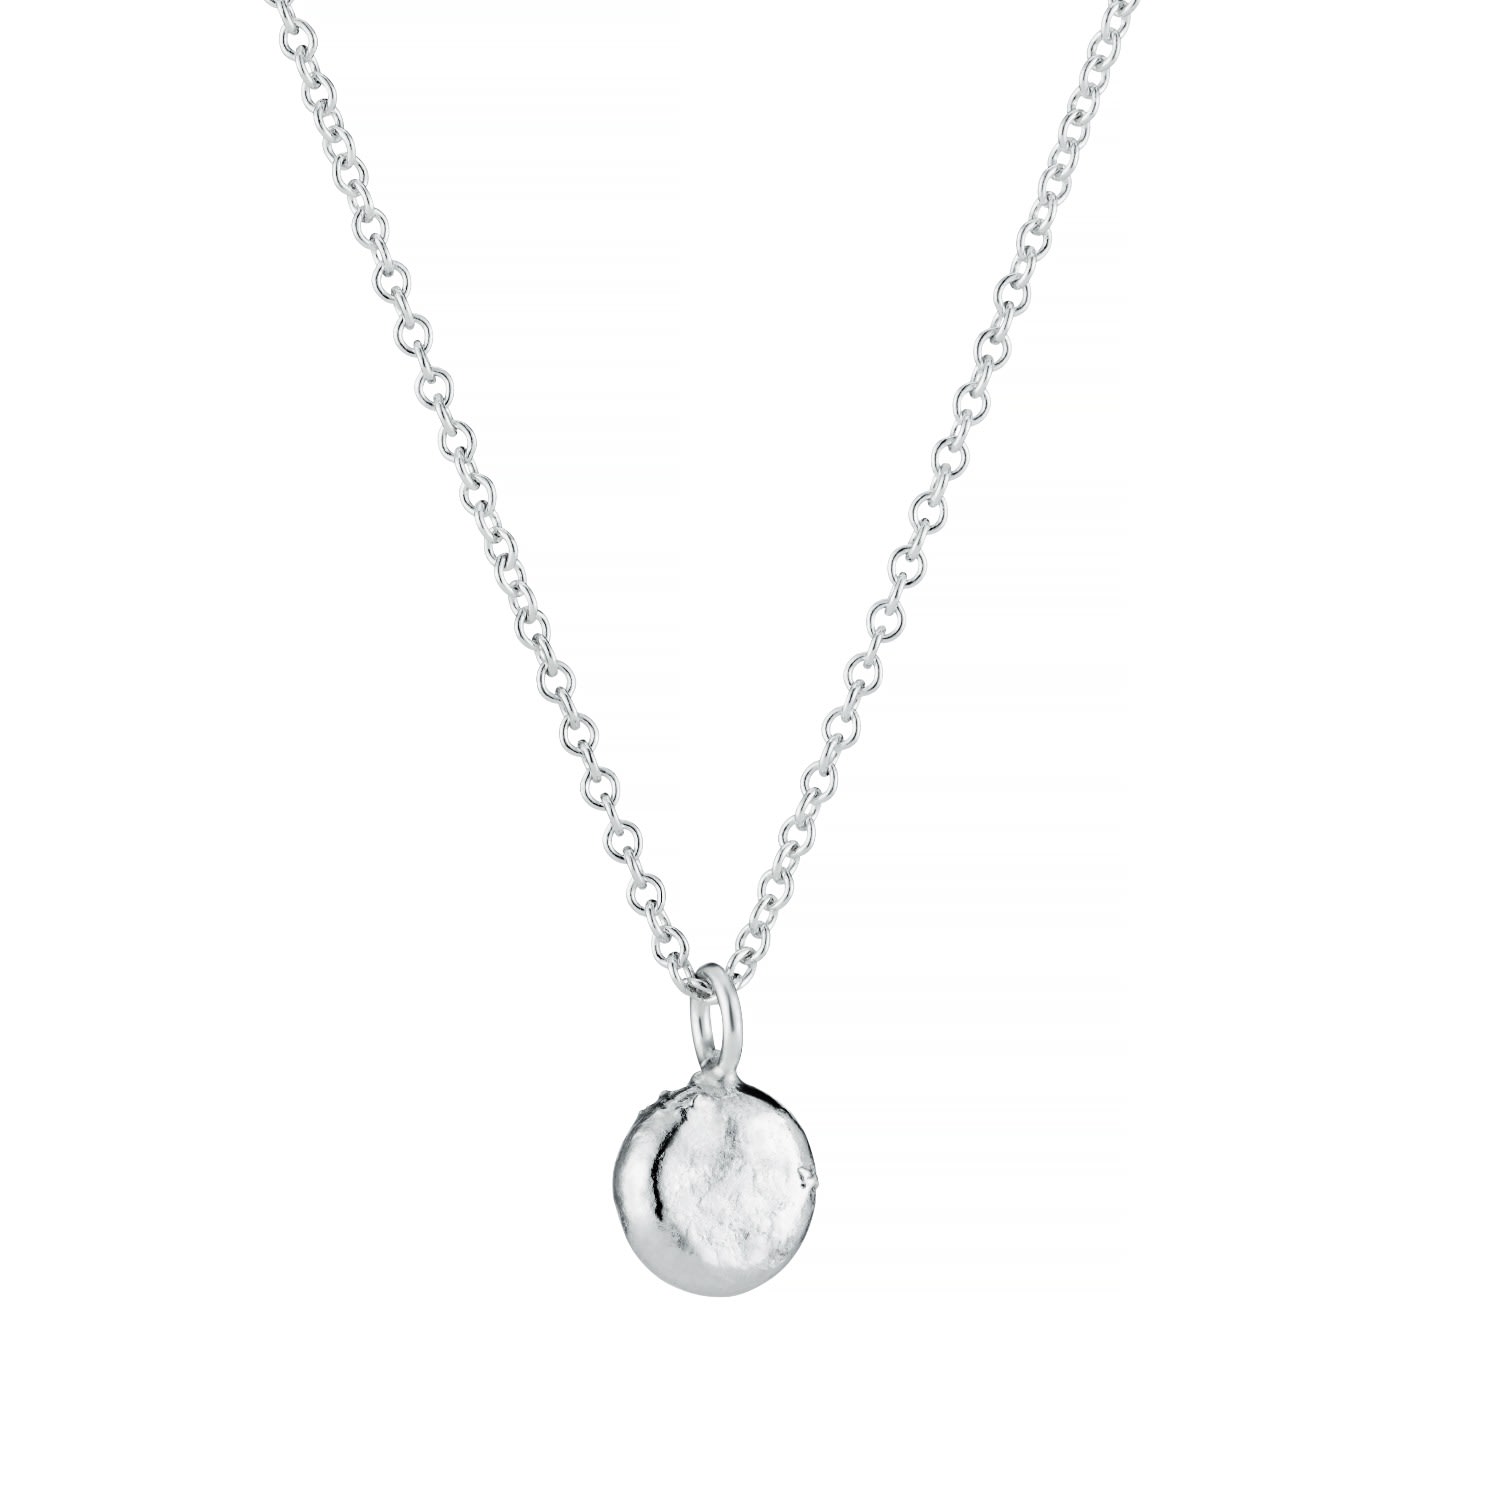 Posh Totty Designs Women's Sterling Silver Molten Orb Necklace In Gray